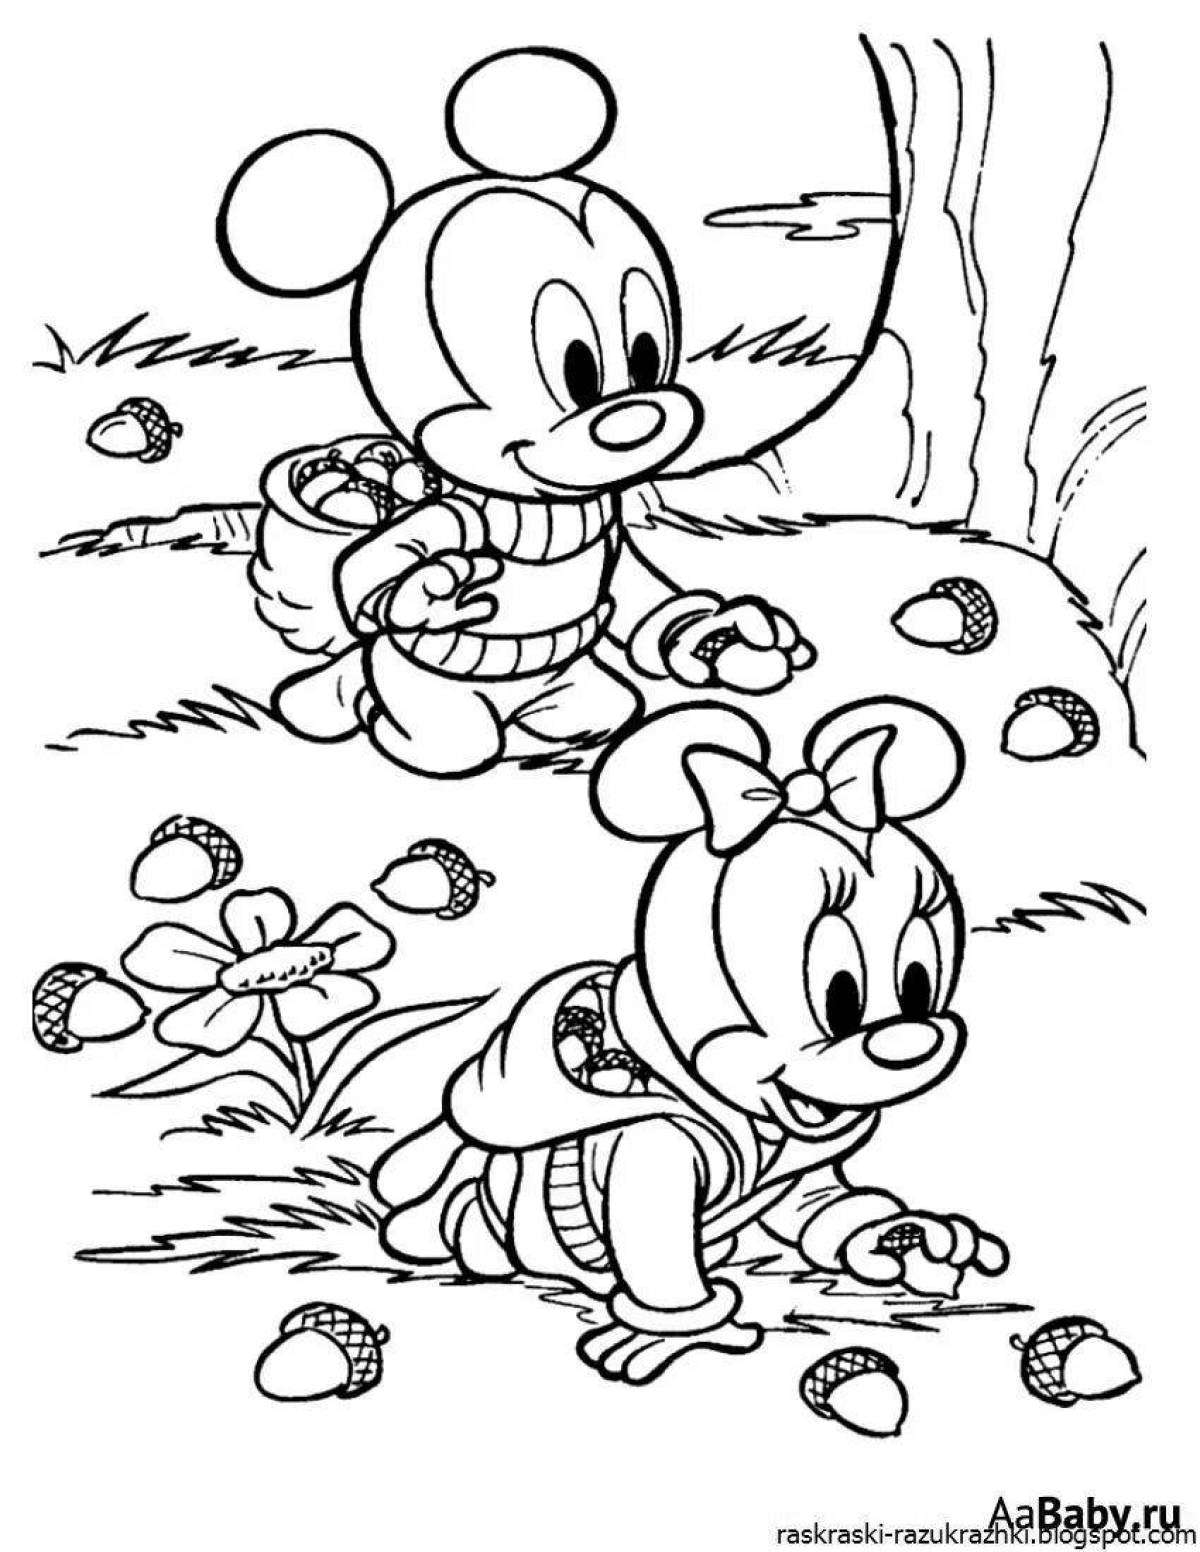 Joyful coloring pdf for the little ones